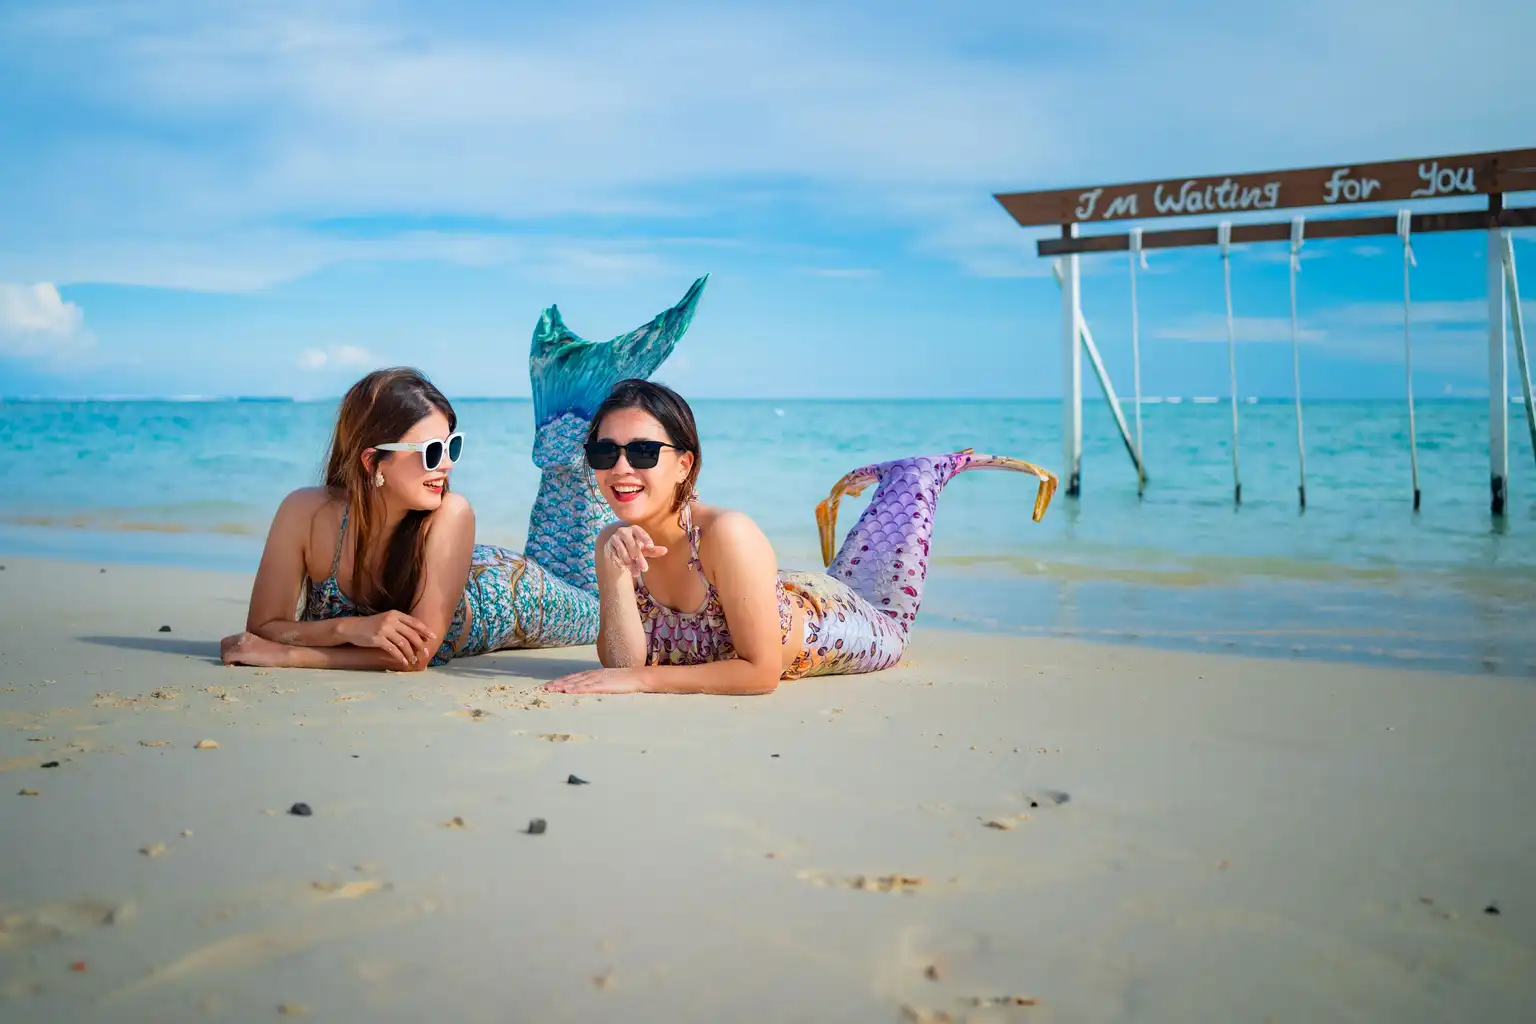 Two women wearing mermaid tails and sunglasses lying on a beach, with a sign saying I'm Waiting for You in the background.